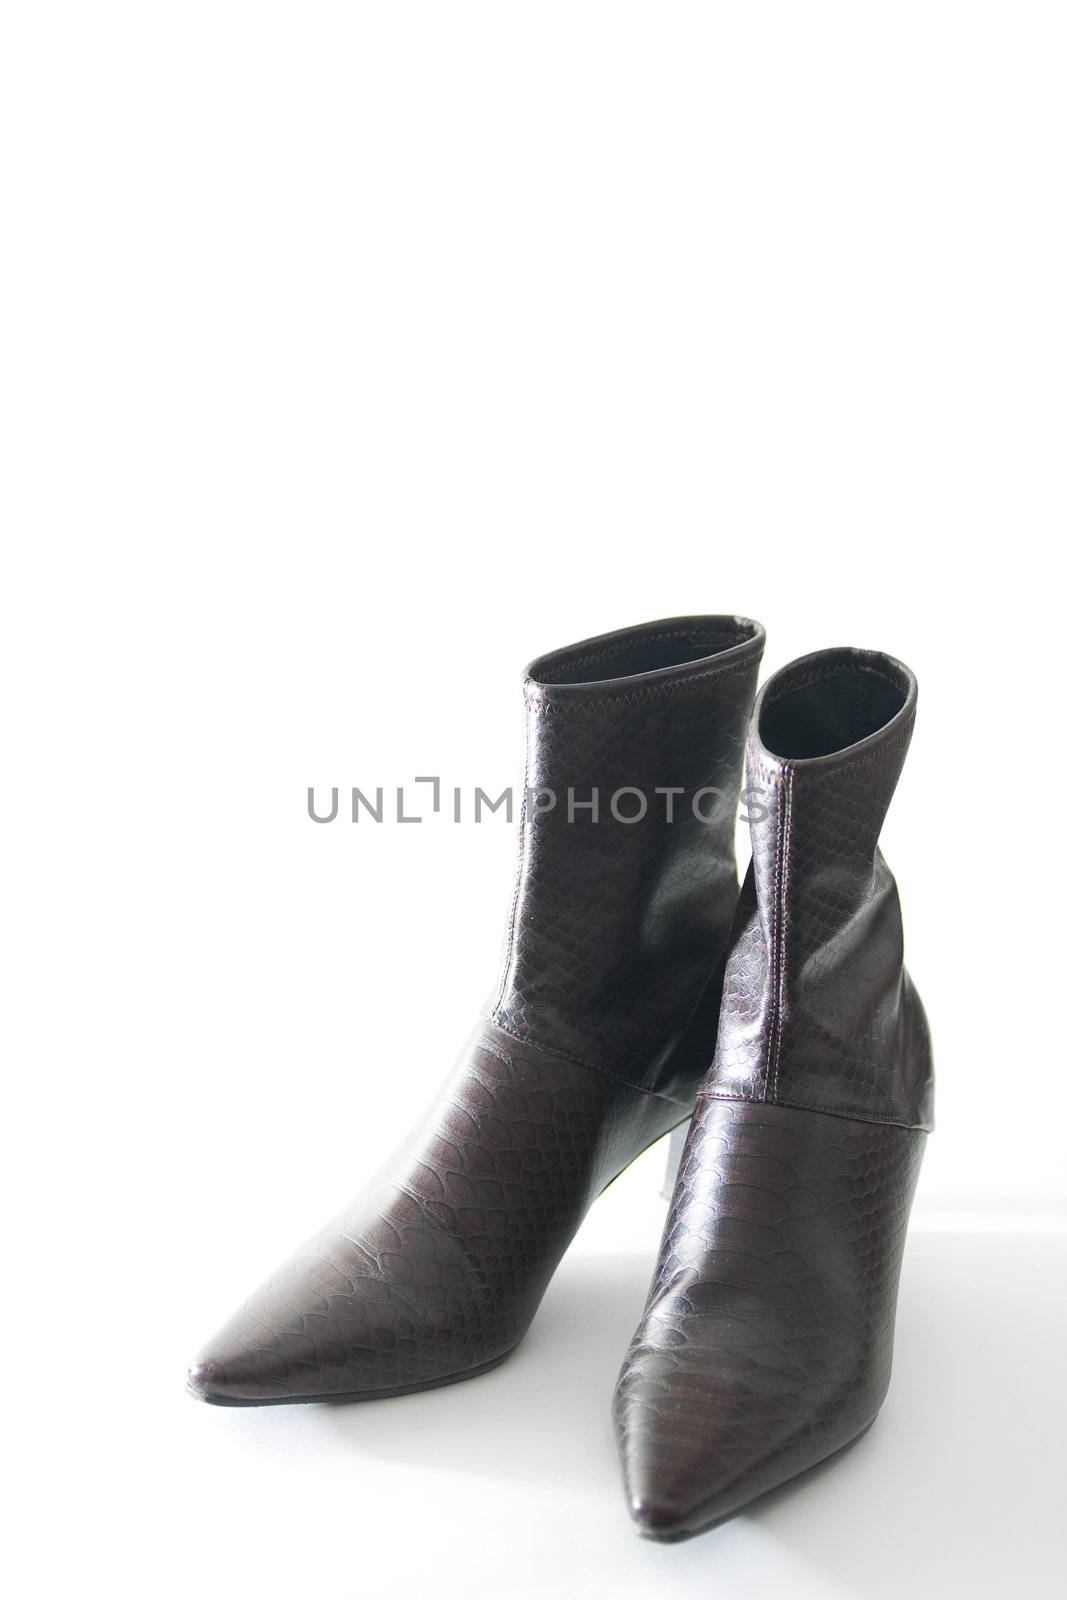 Womans boots, isolated on white by woodygraphs